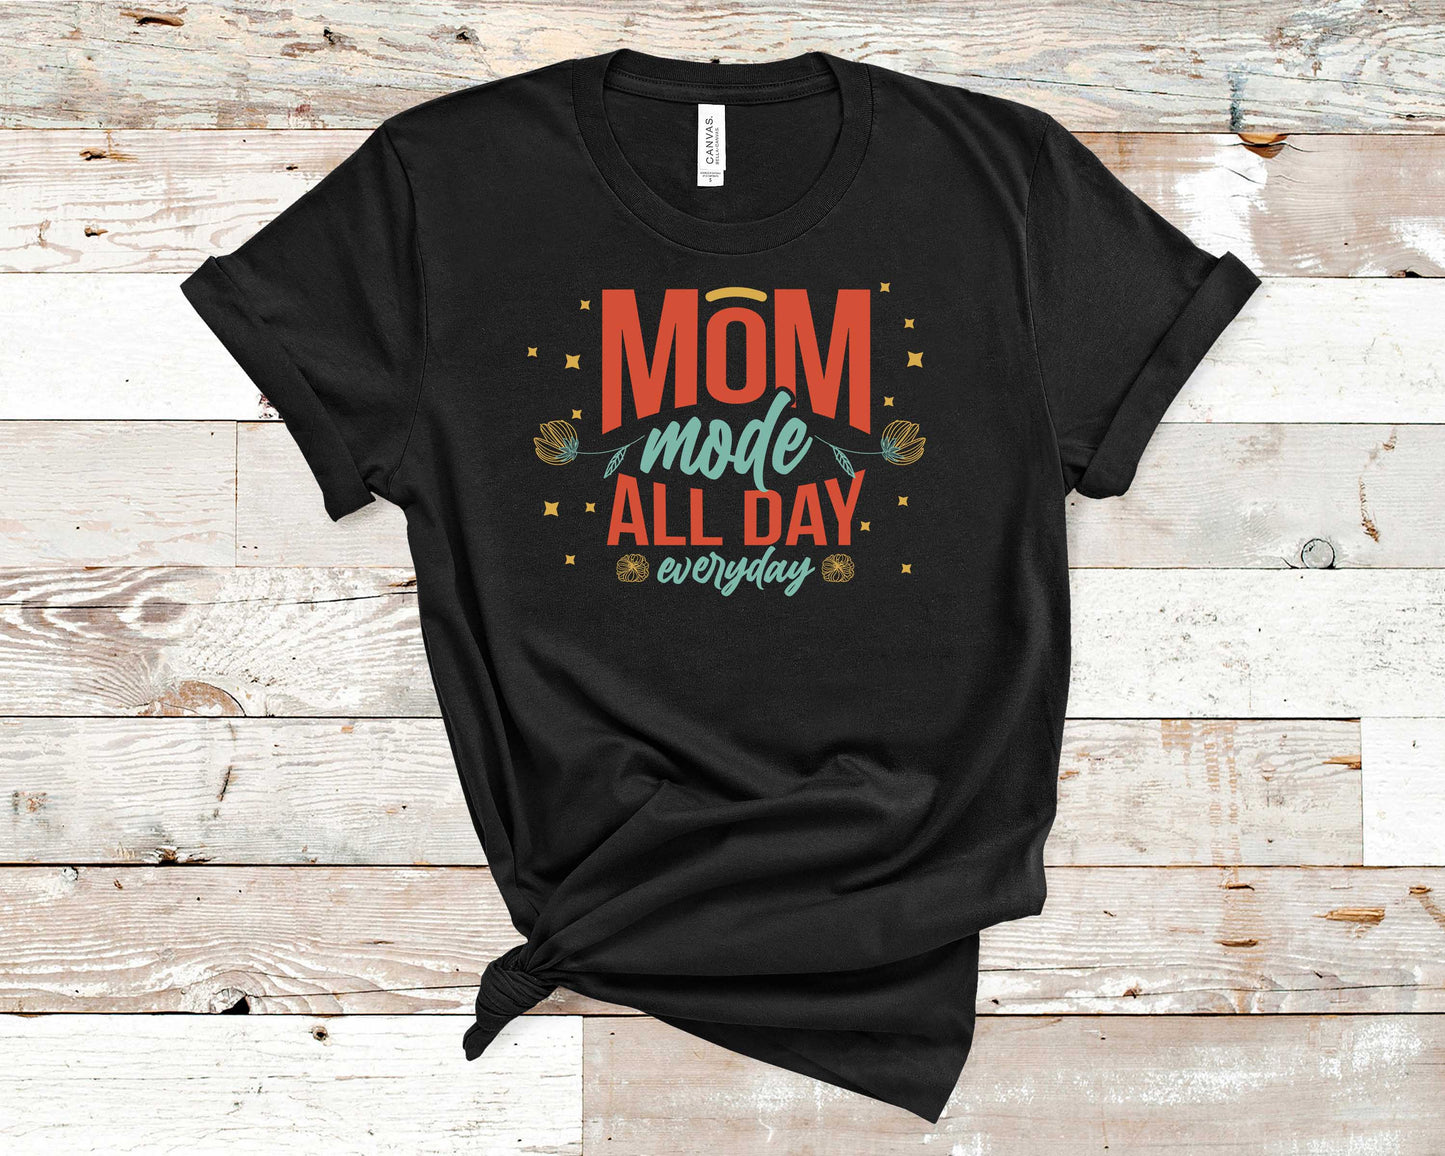 Mom Mode - Mother's Day